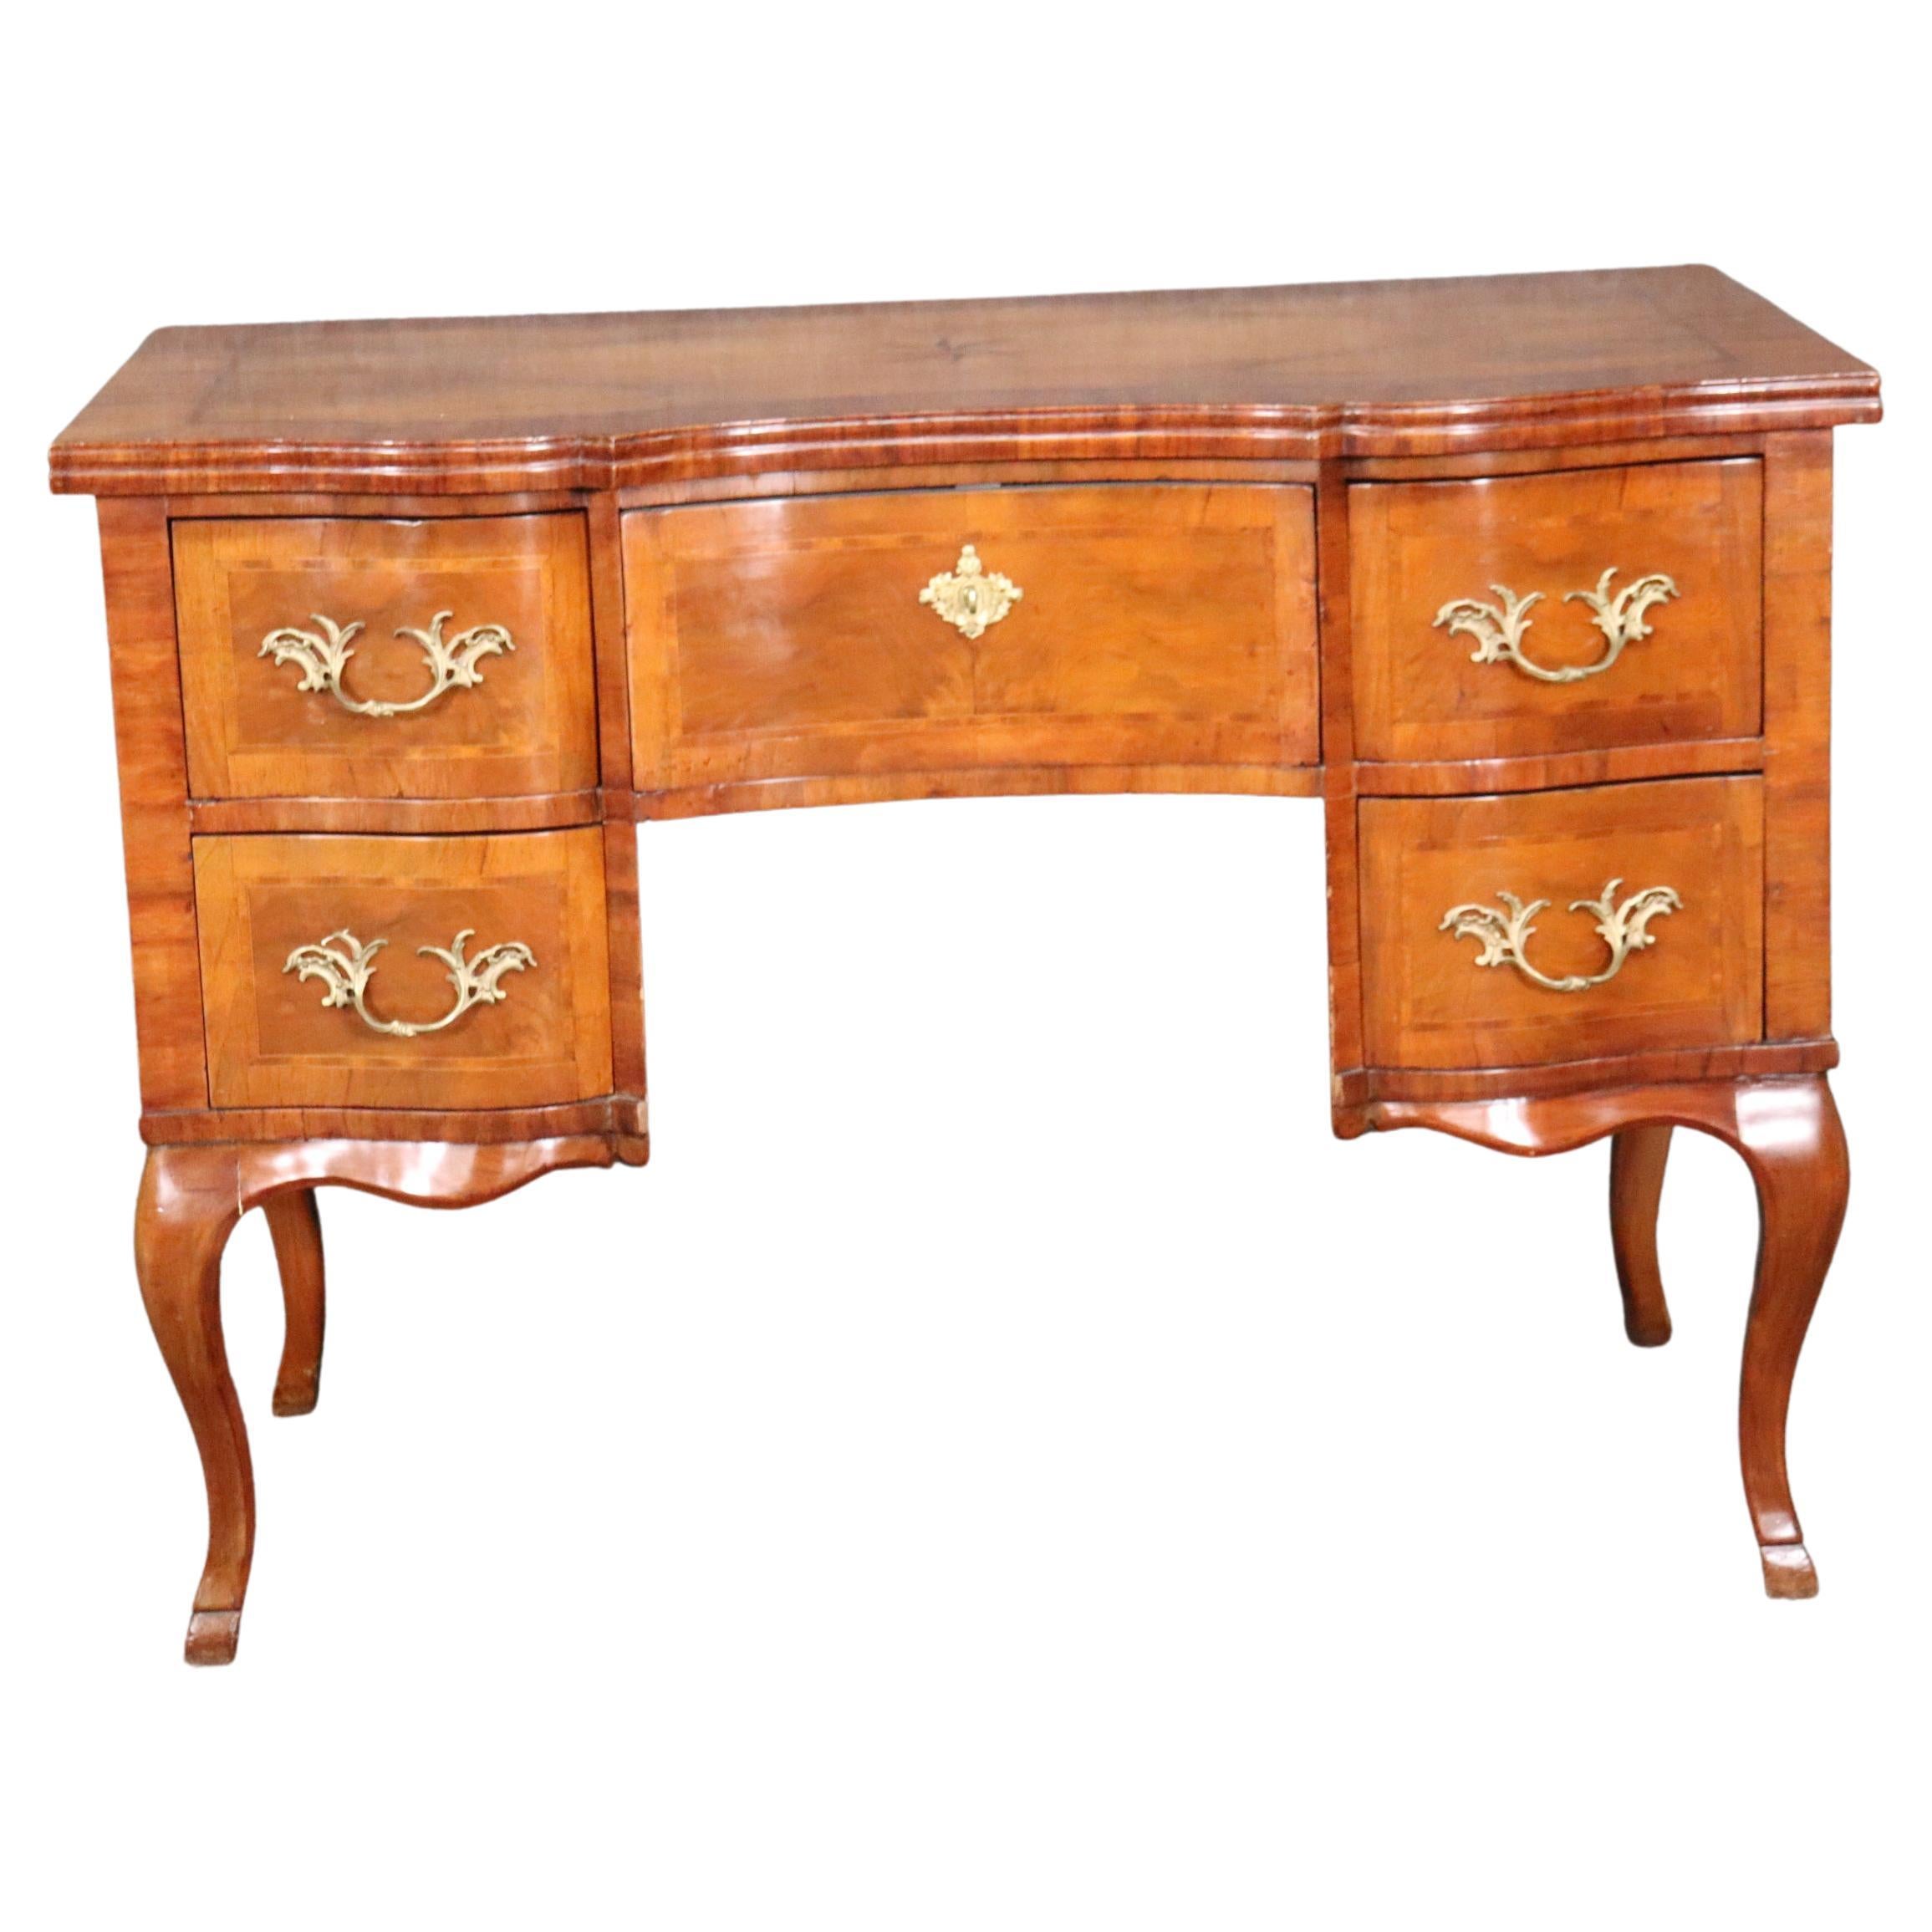 Gorgeous Inlaid Continental Louis XV Style Walnut Writing Desk circa 1920s For Sale